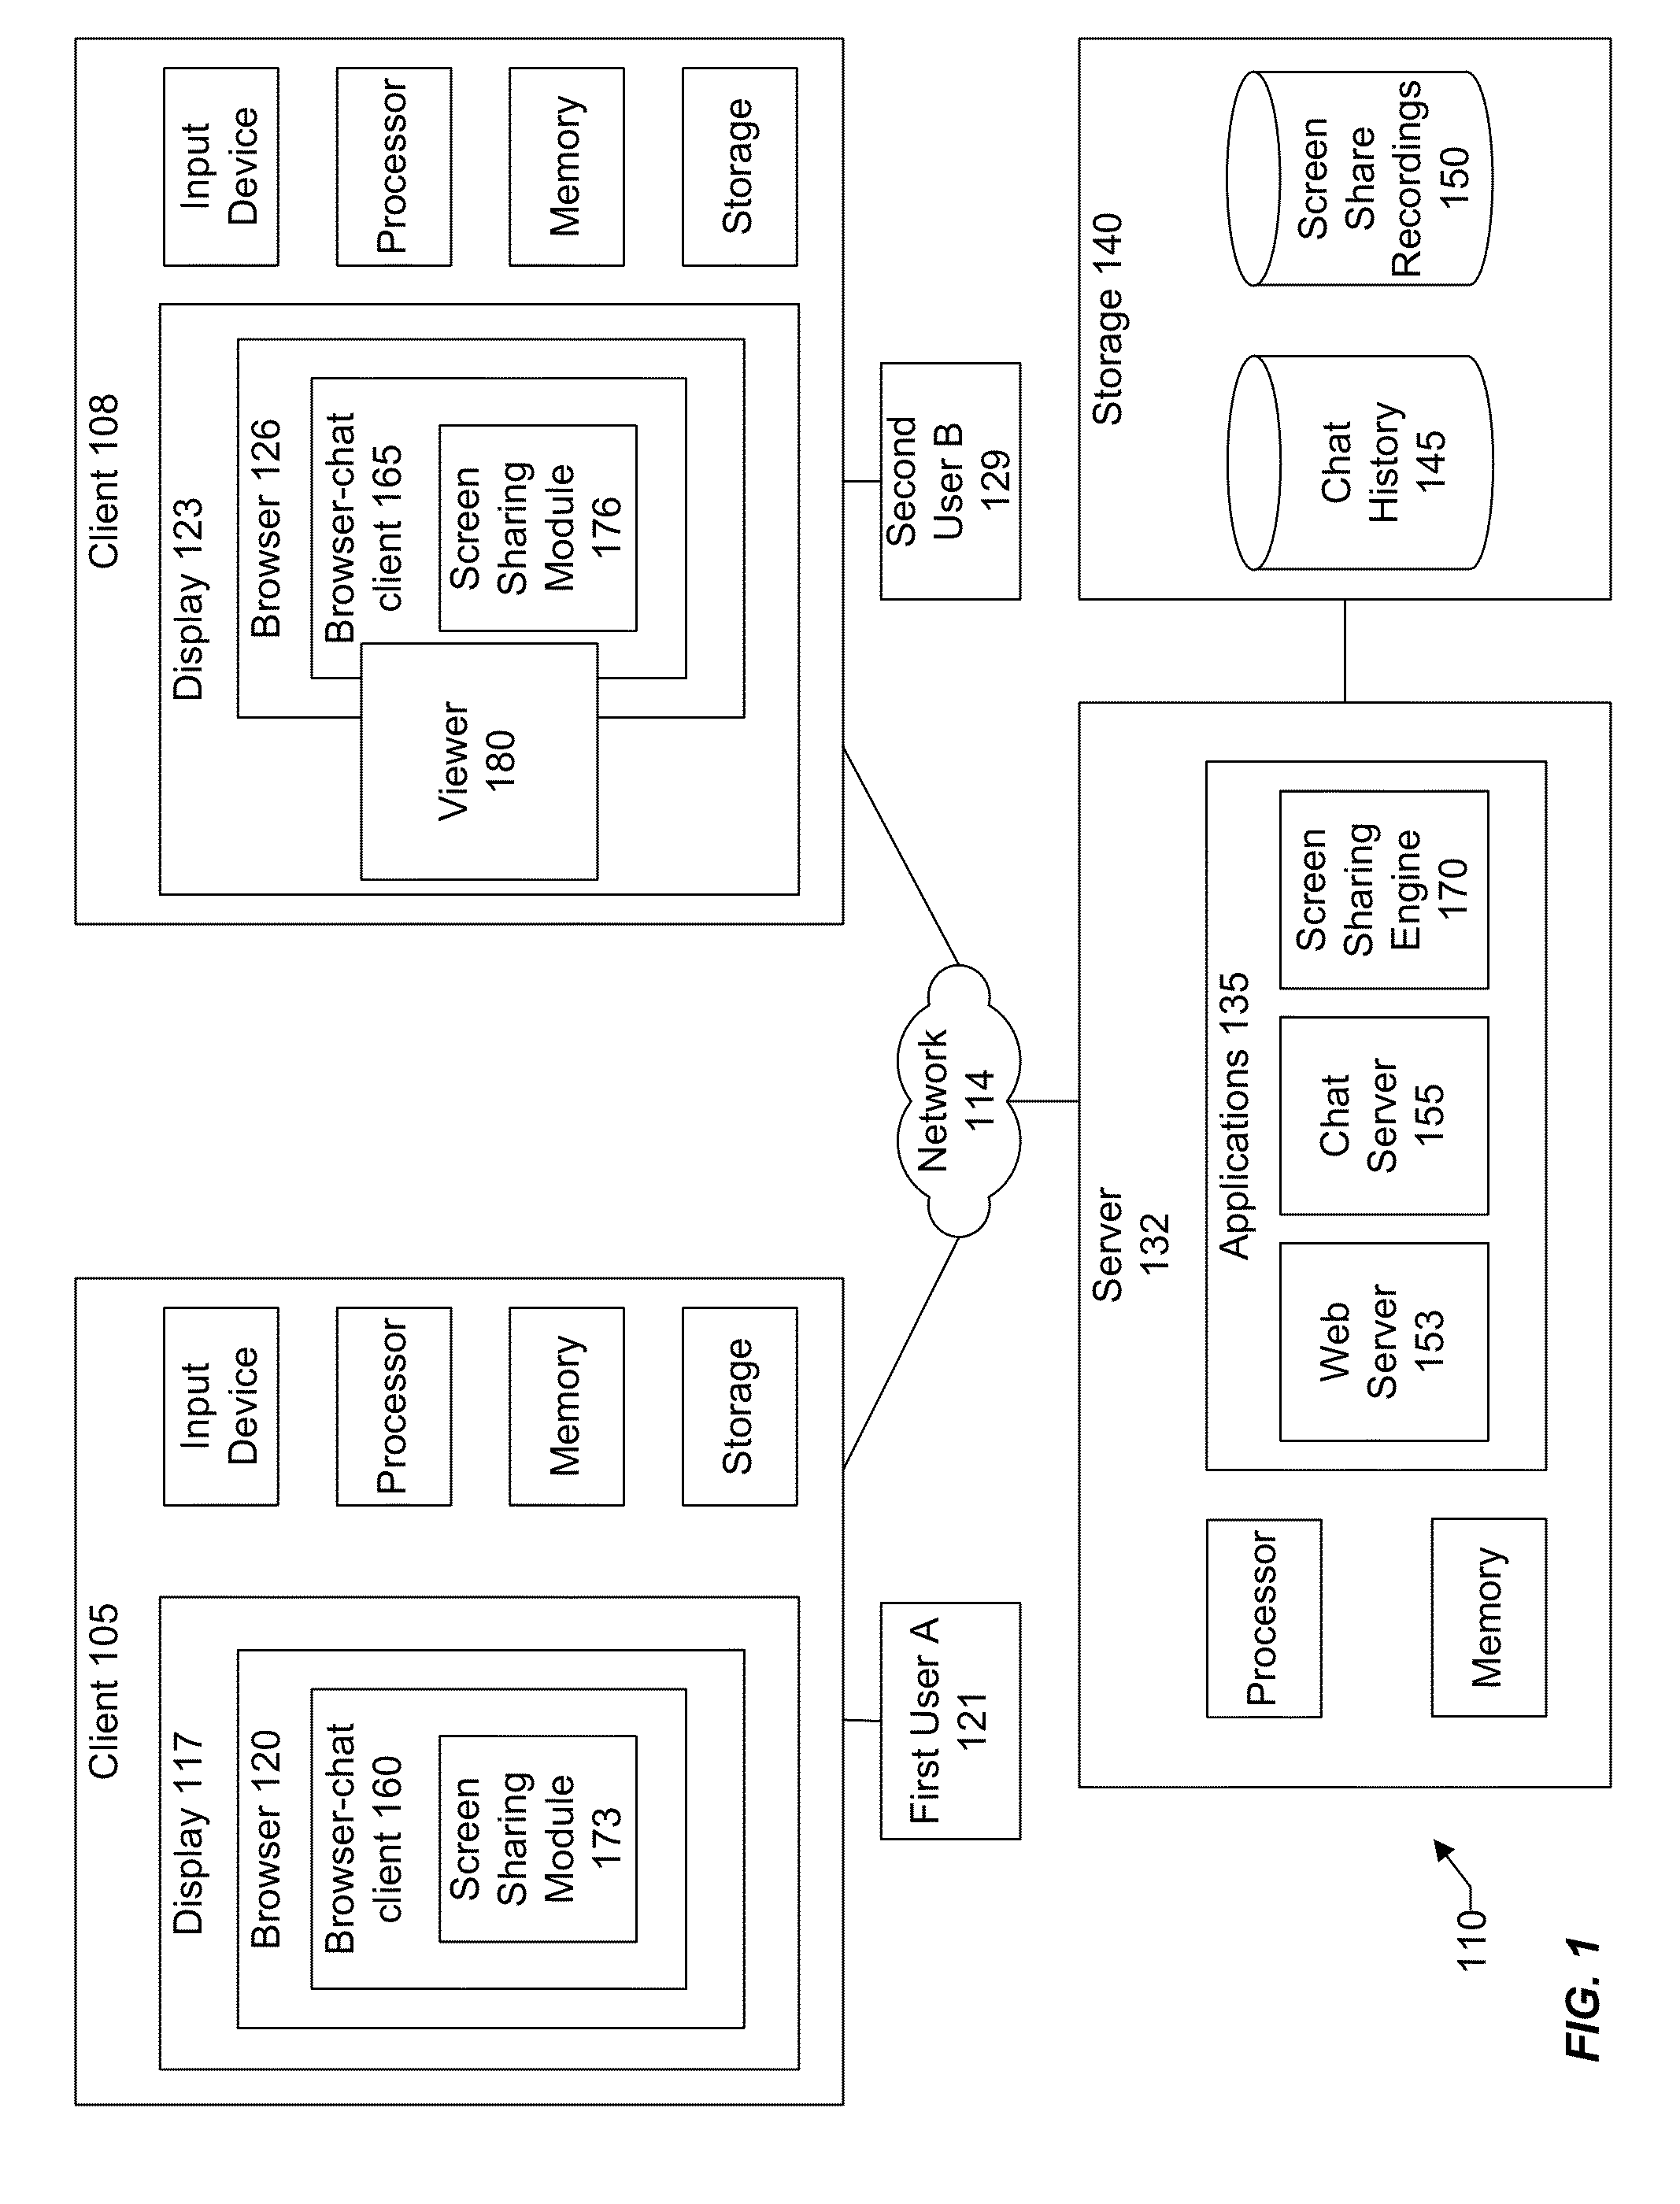 Application sharing functionality in an information networking environment